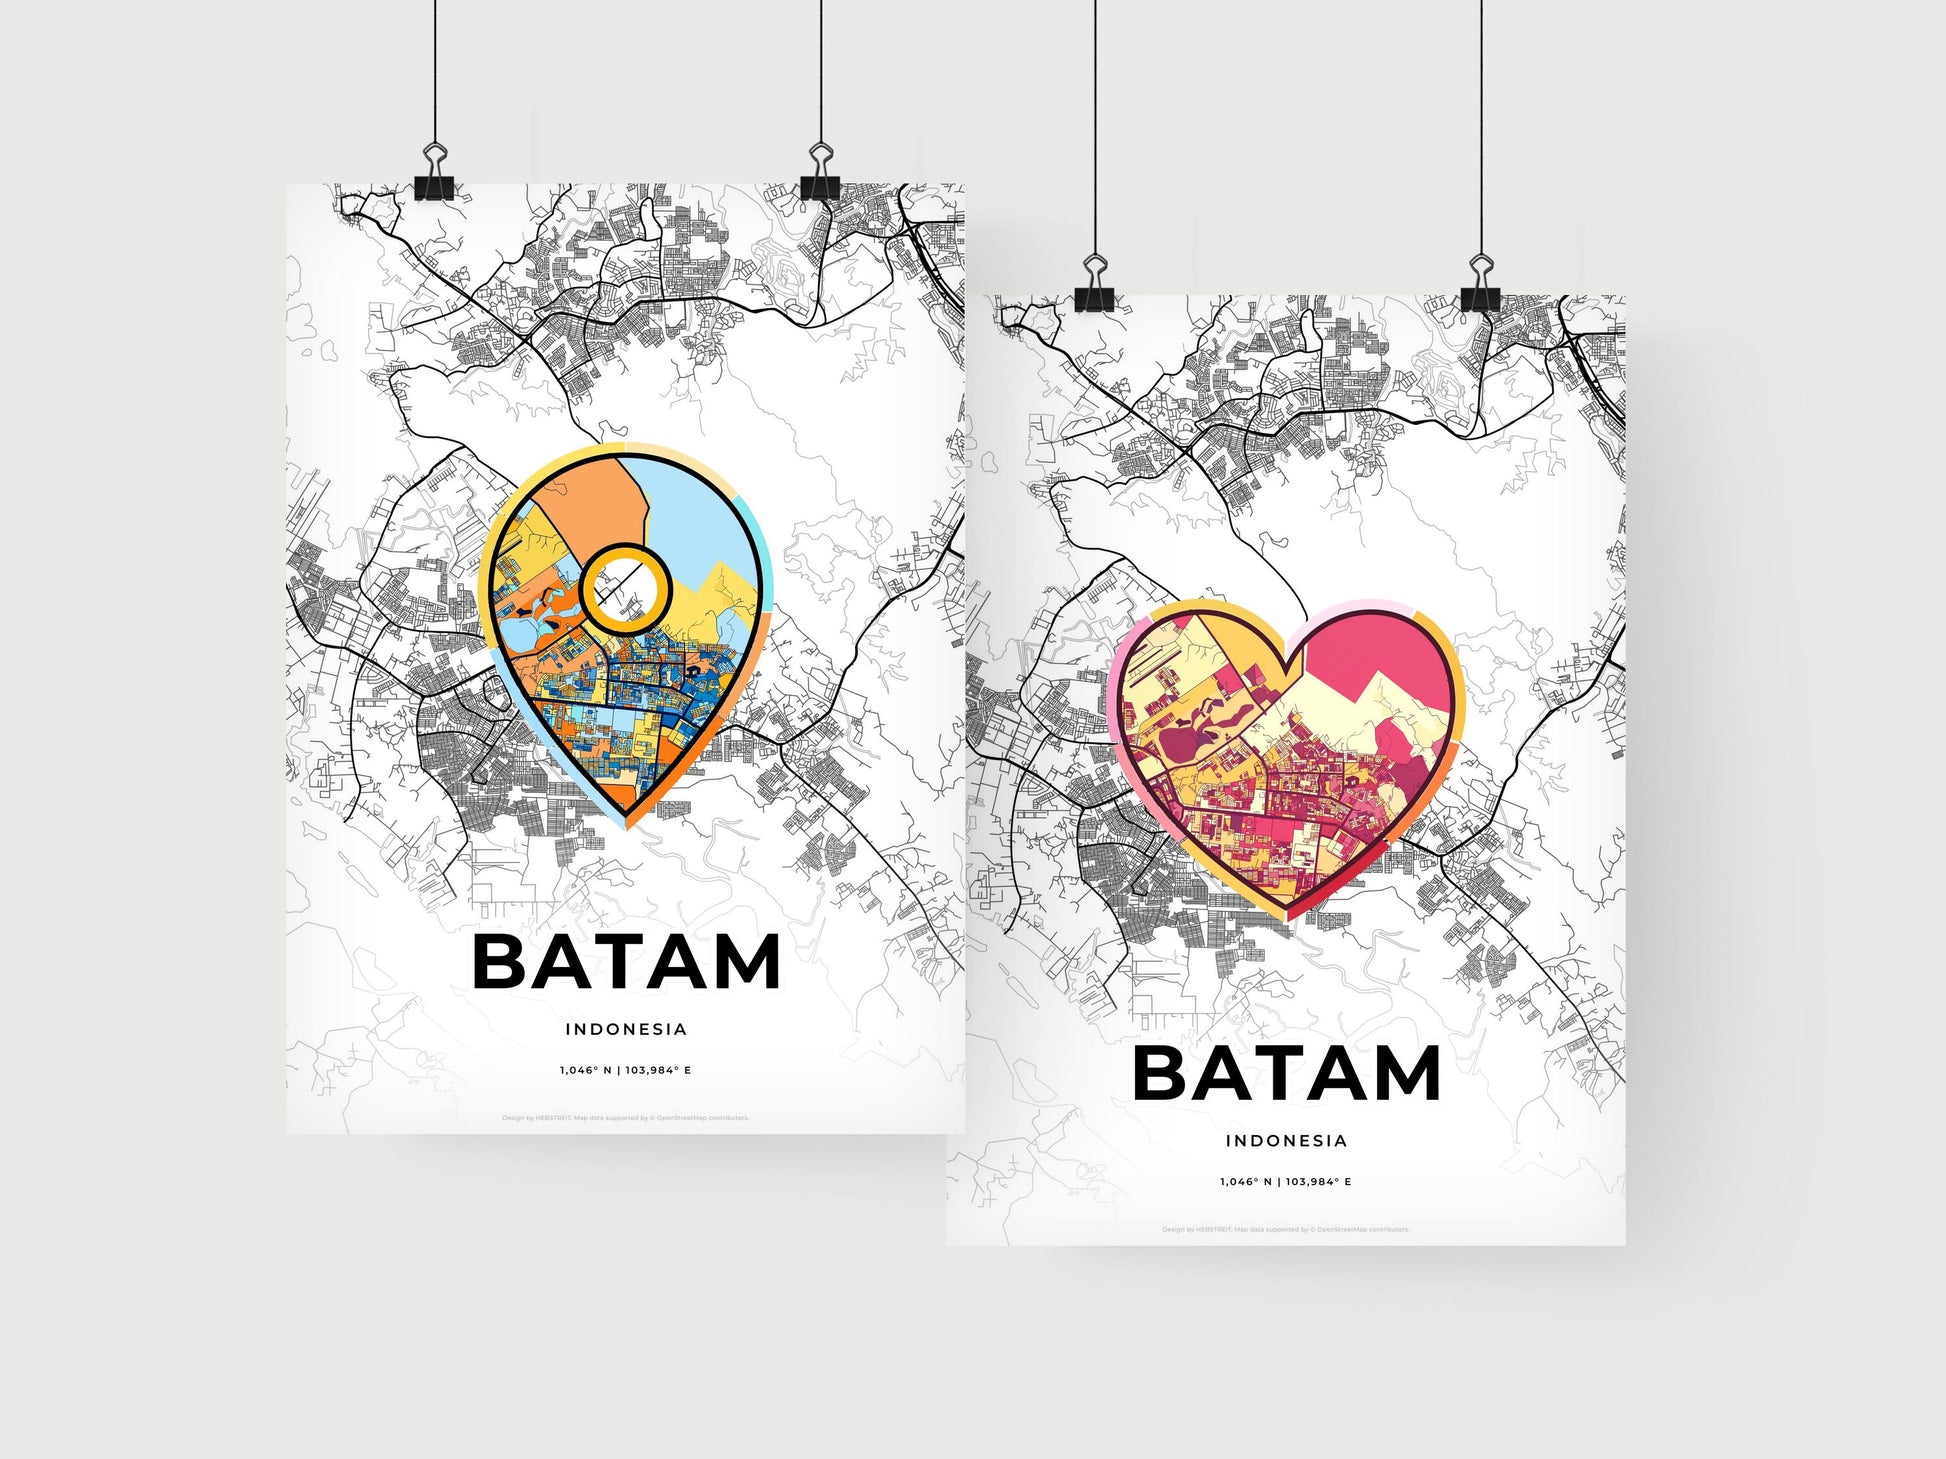 BATAM INDONESIA minimal art map with a colorful icon. Where it all began, Couple map gift.